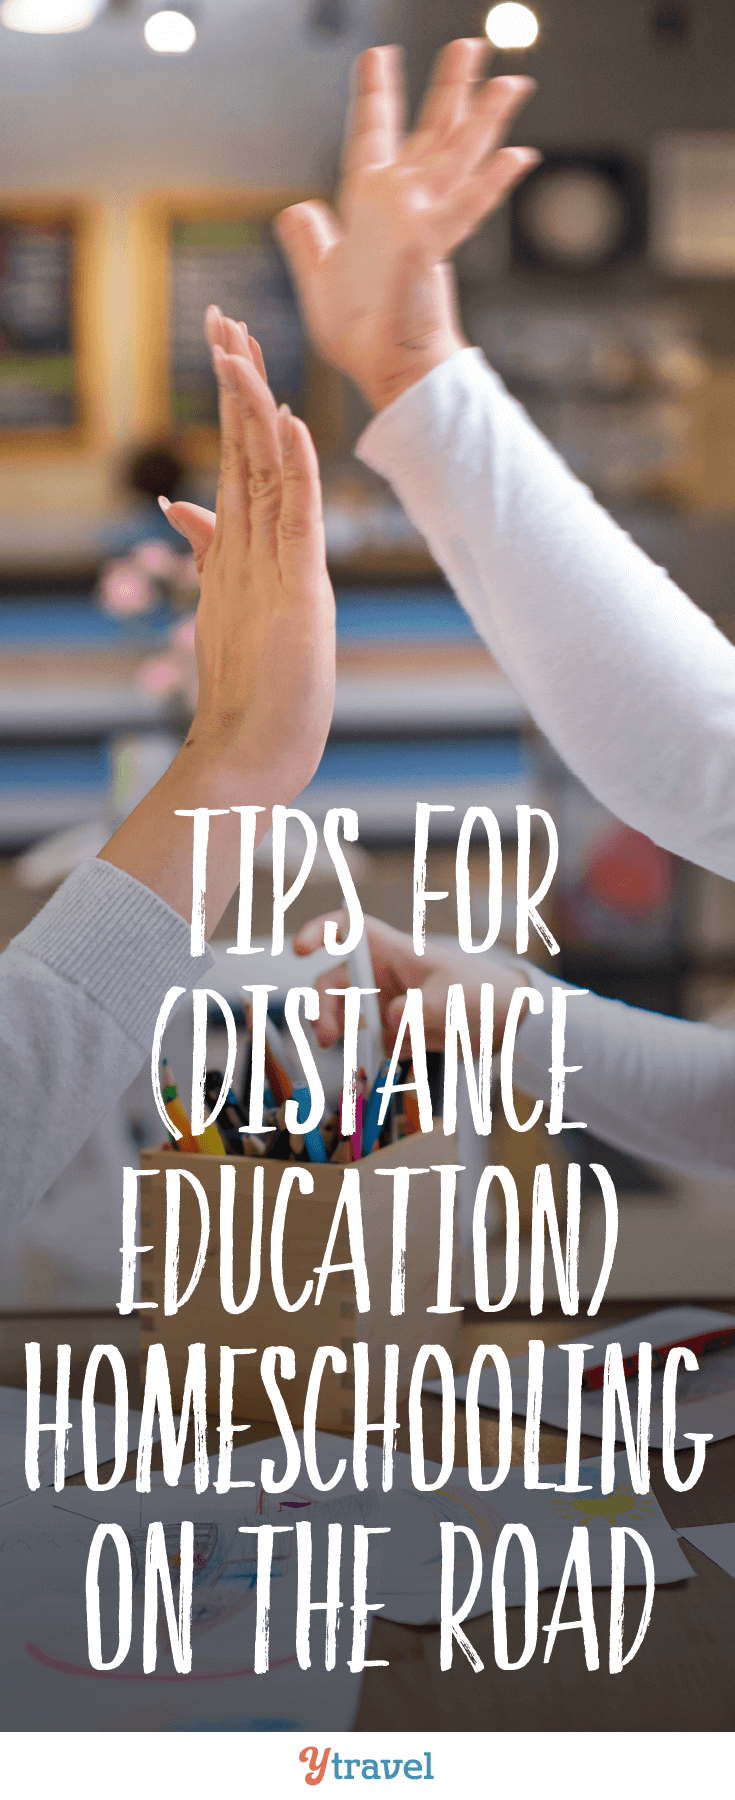 Check out these tips for distance education homeschooling on the road!